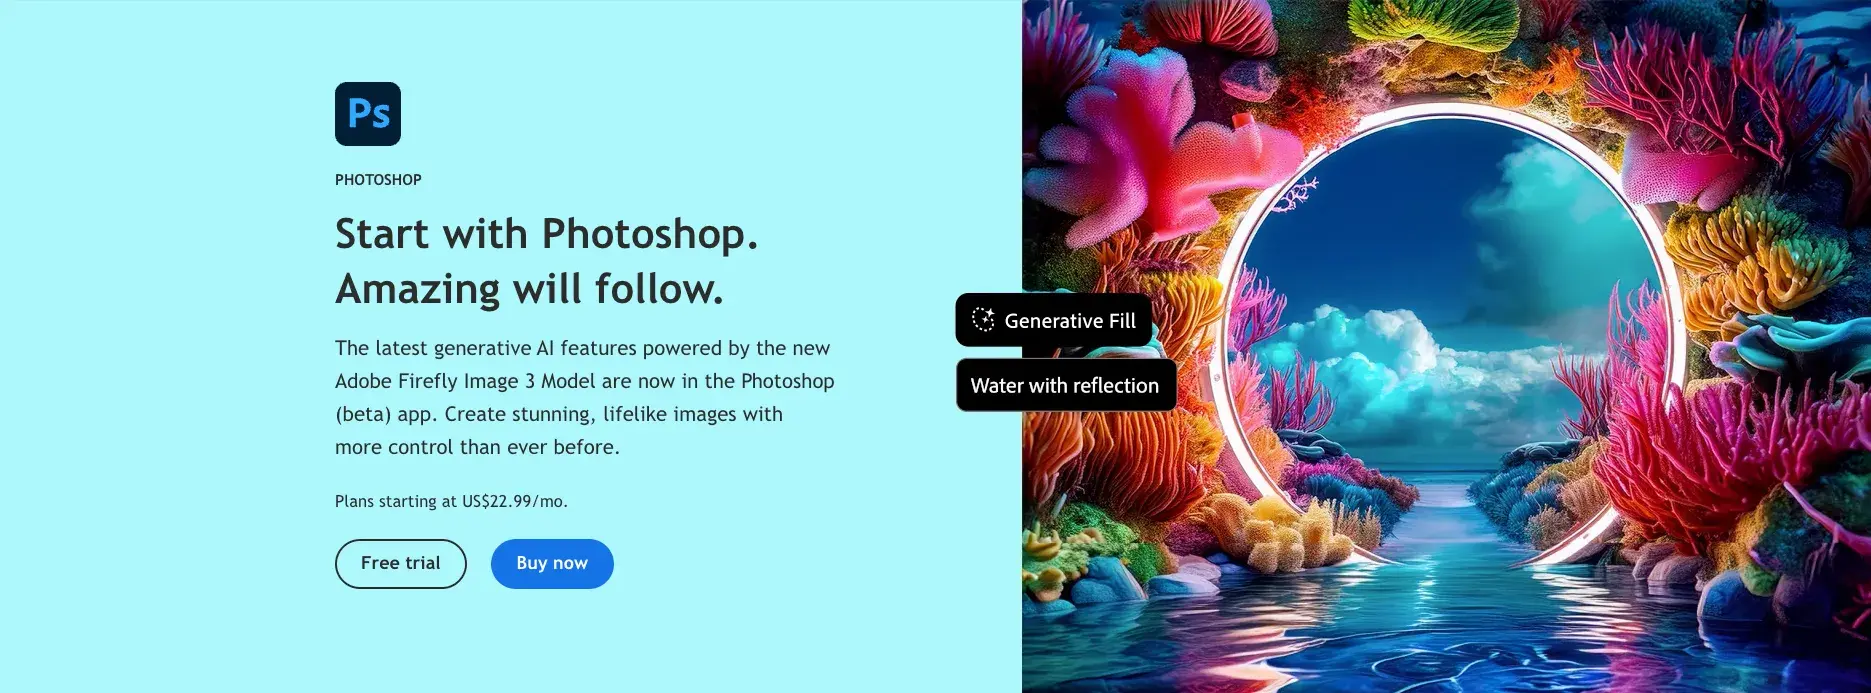 Homepage of Adobe Photoshop's site. The platform is featured in this article describing what mockups are used for.